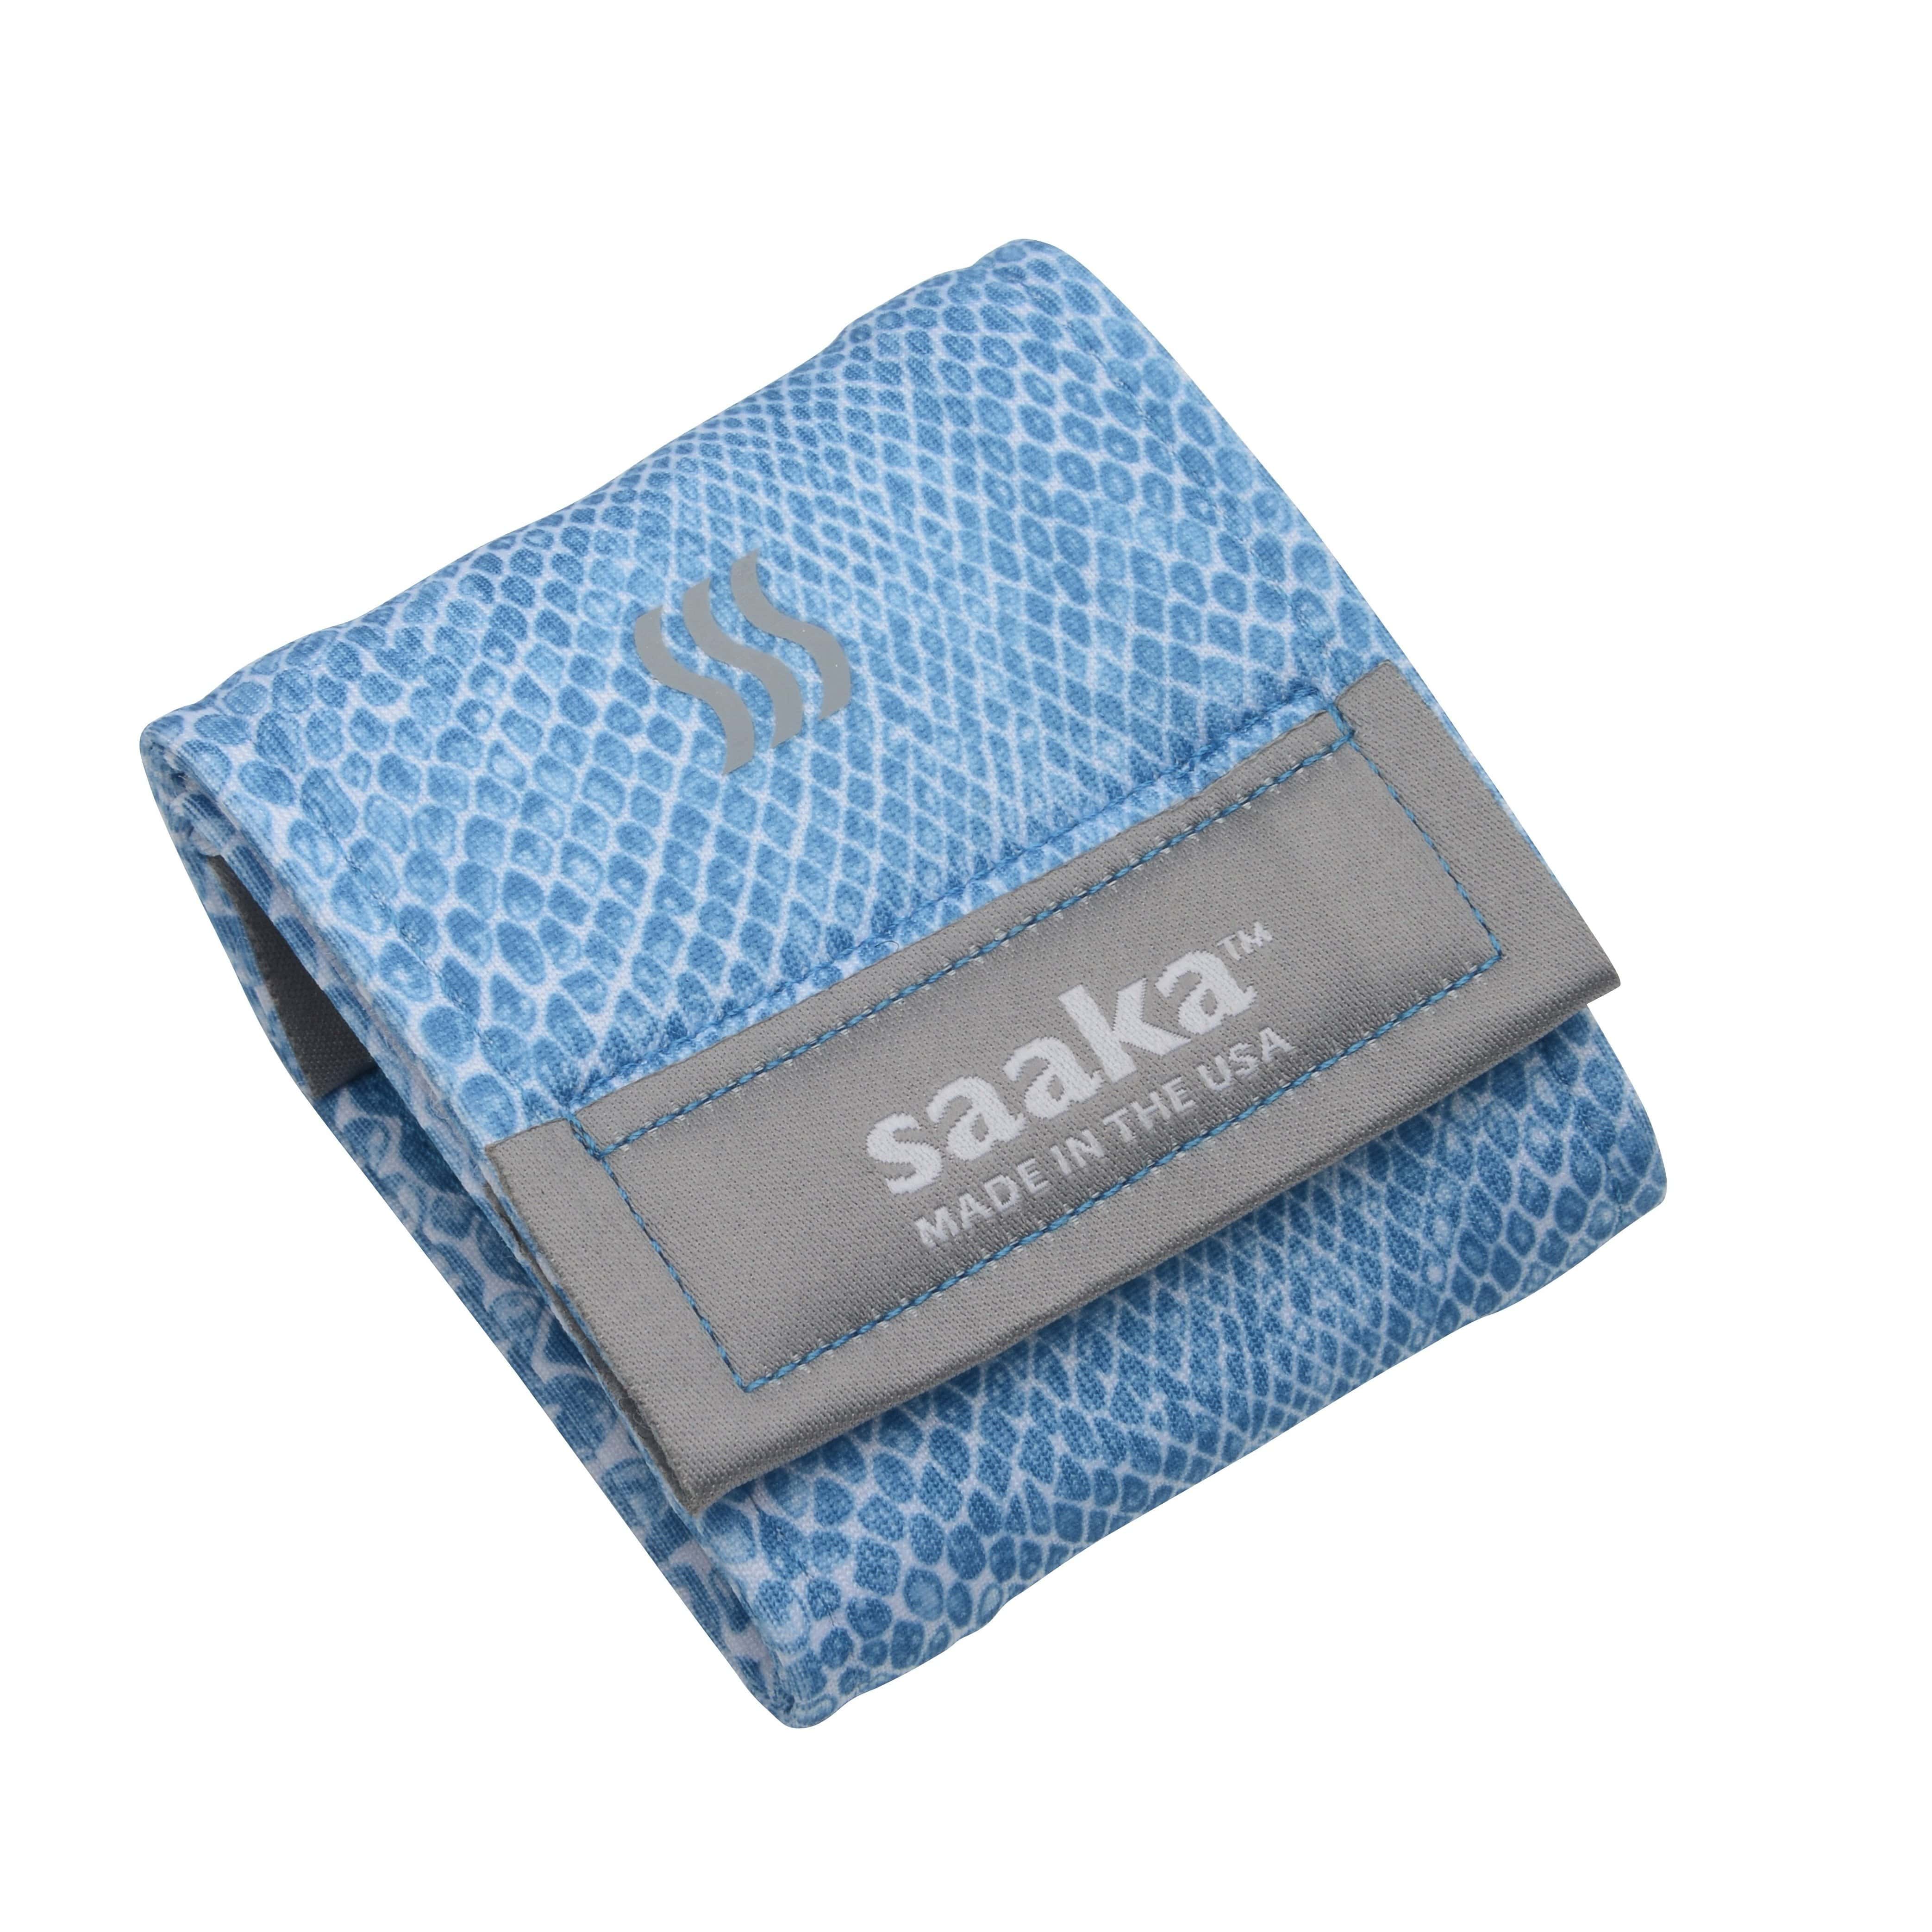 Product photo of a sweat wristband in a light blue pattern.